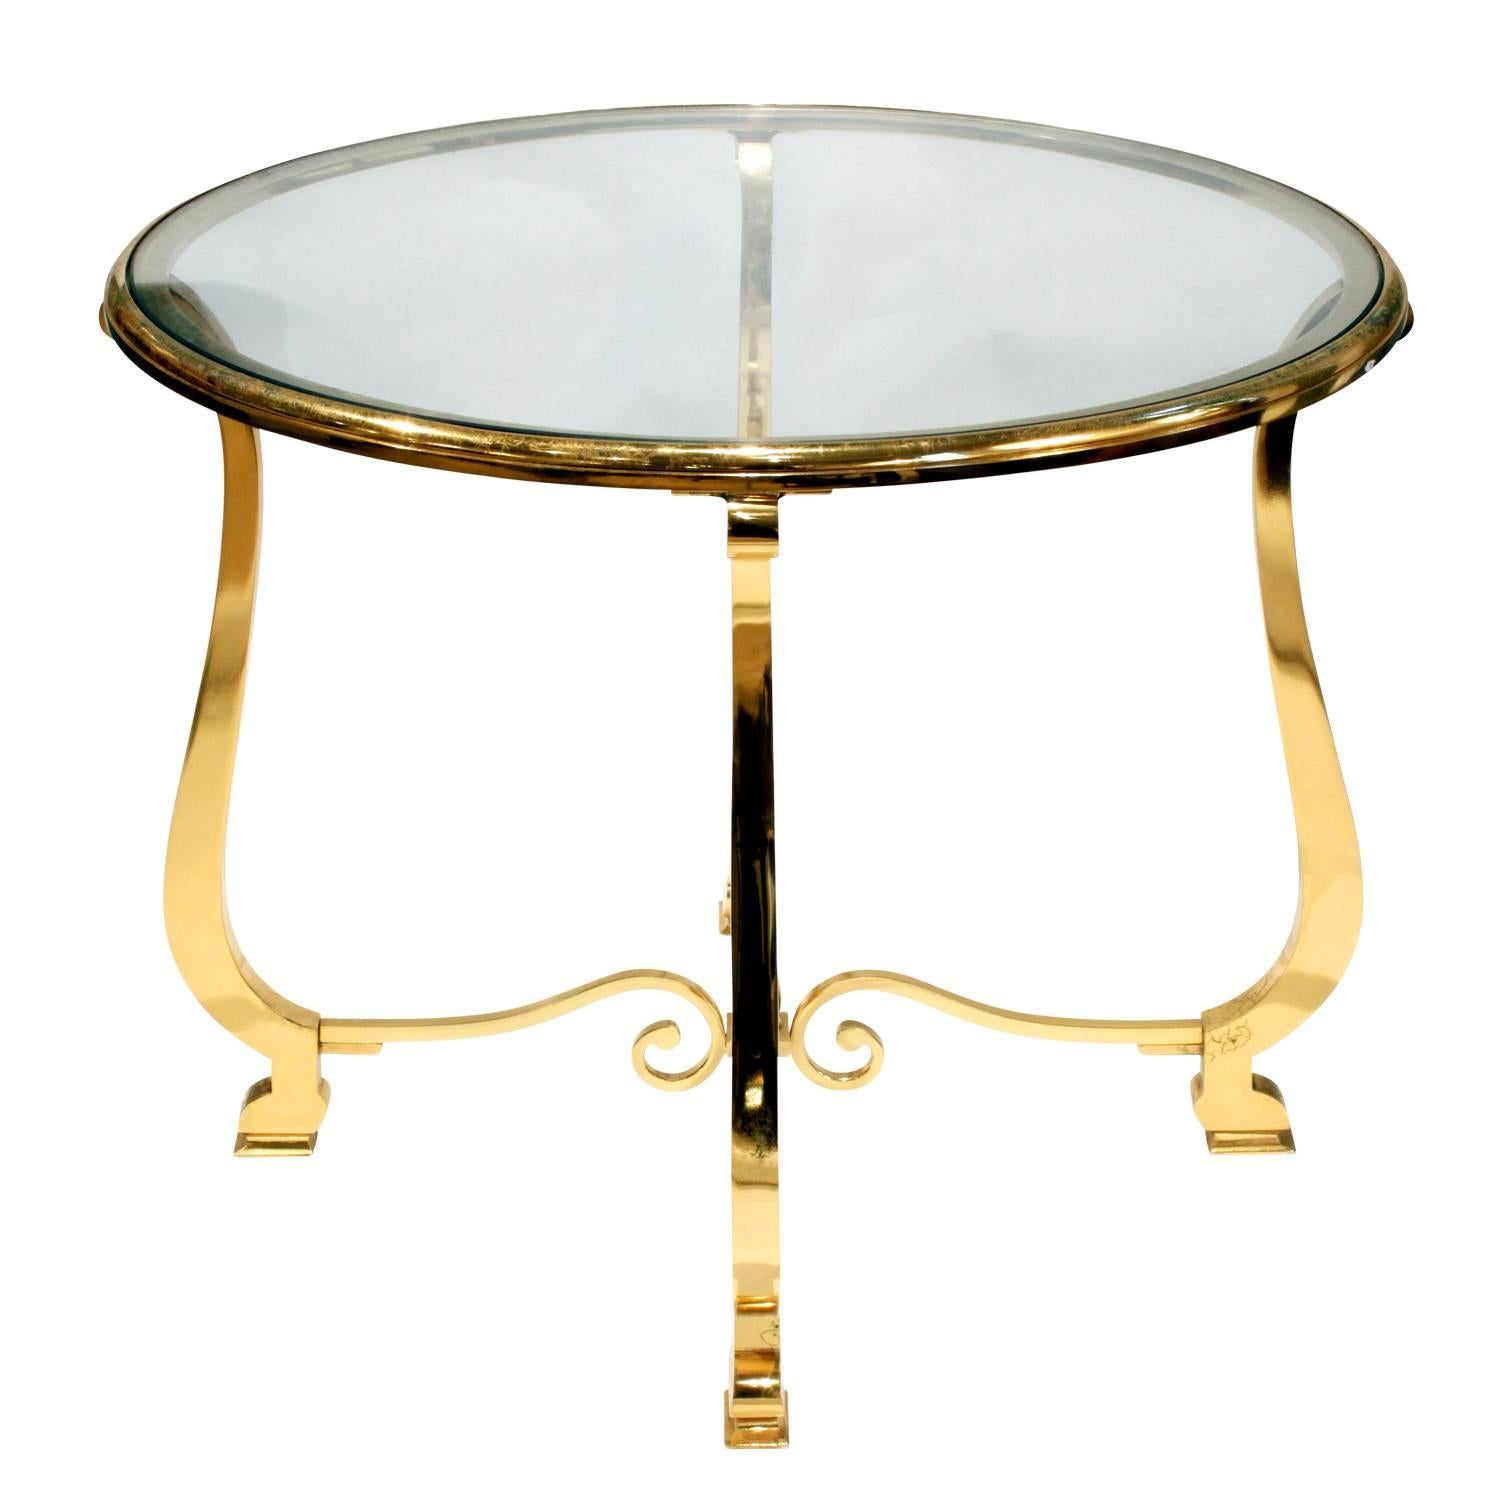 Side table model no. FM65, special order in polished gold plate with inset glass top, by Paul M. Jones, American, 1969 (original invoice on file).